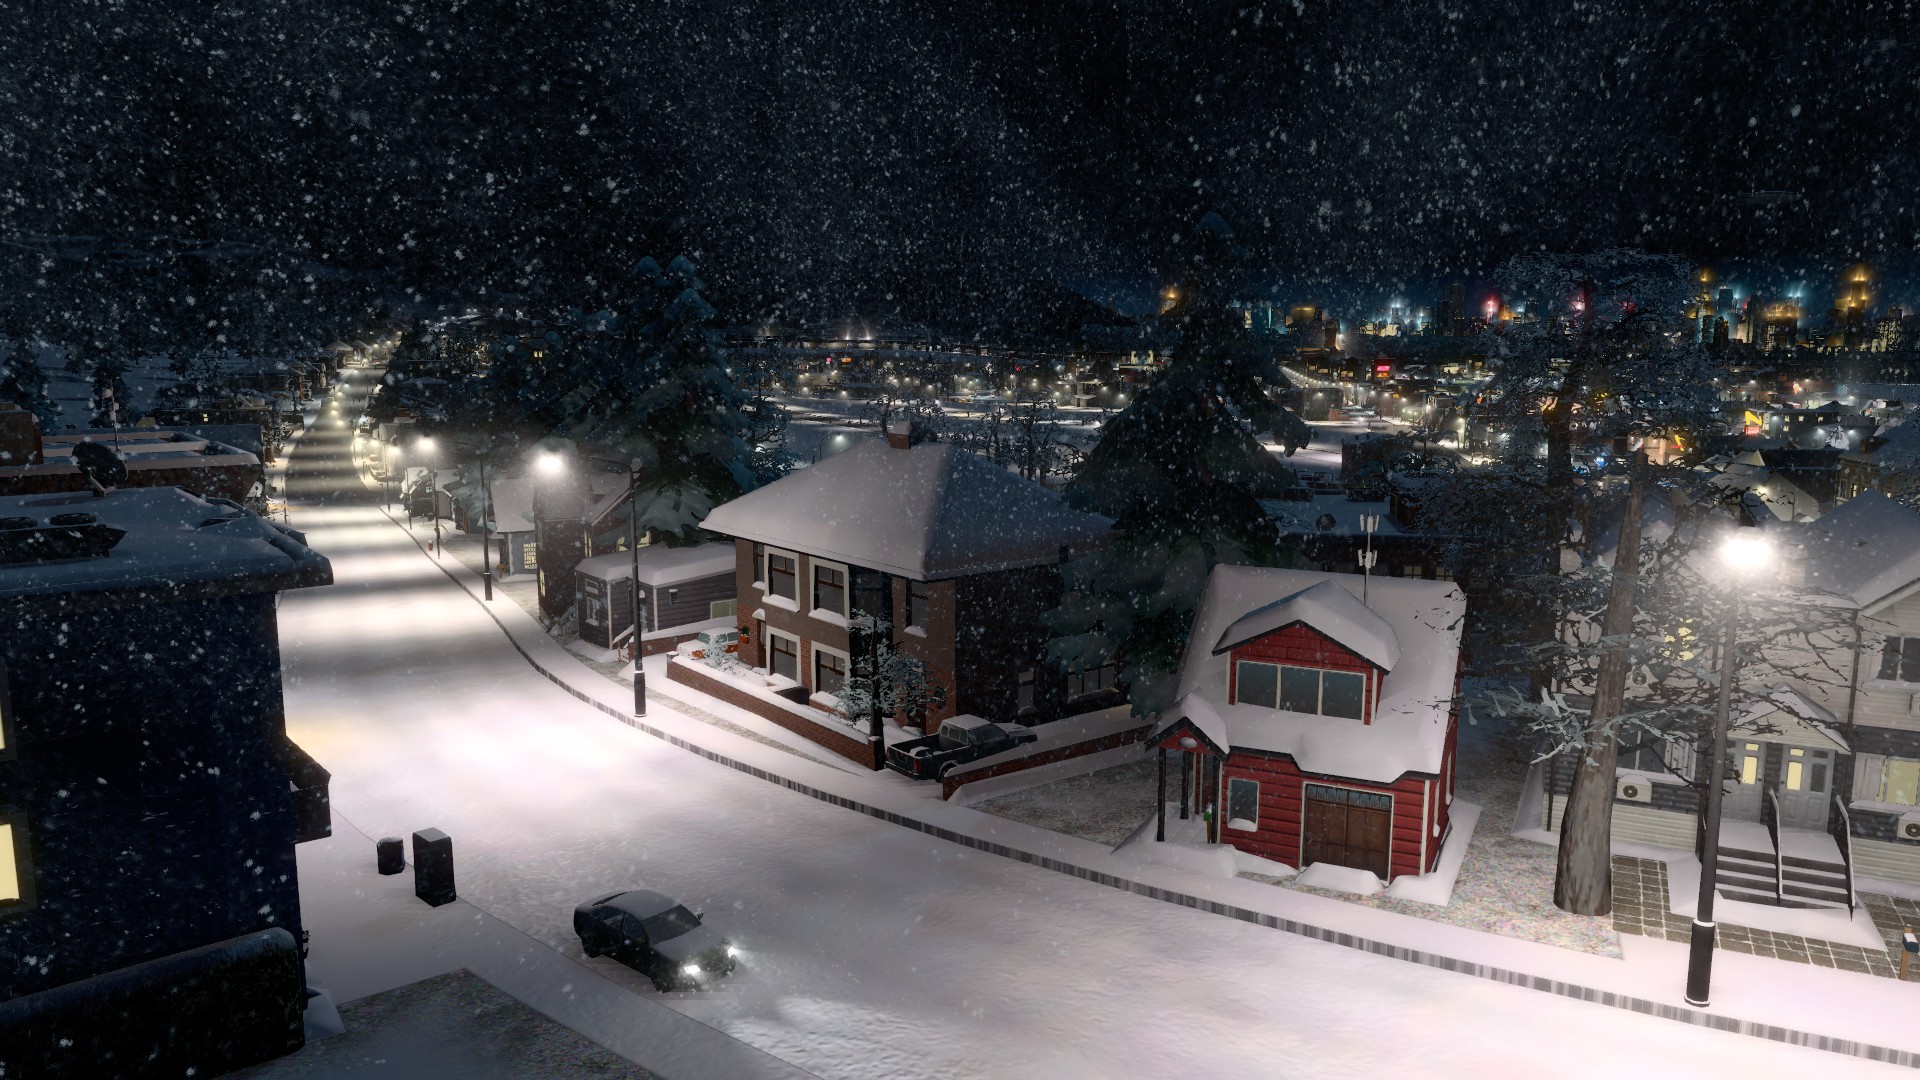 Cities Skylines Snowfall Tests the Limits of the Word 